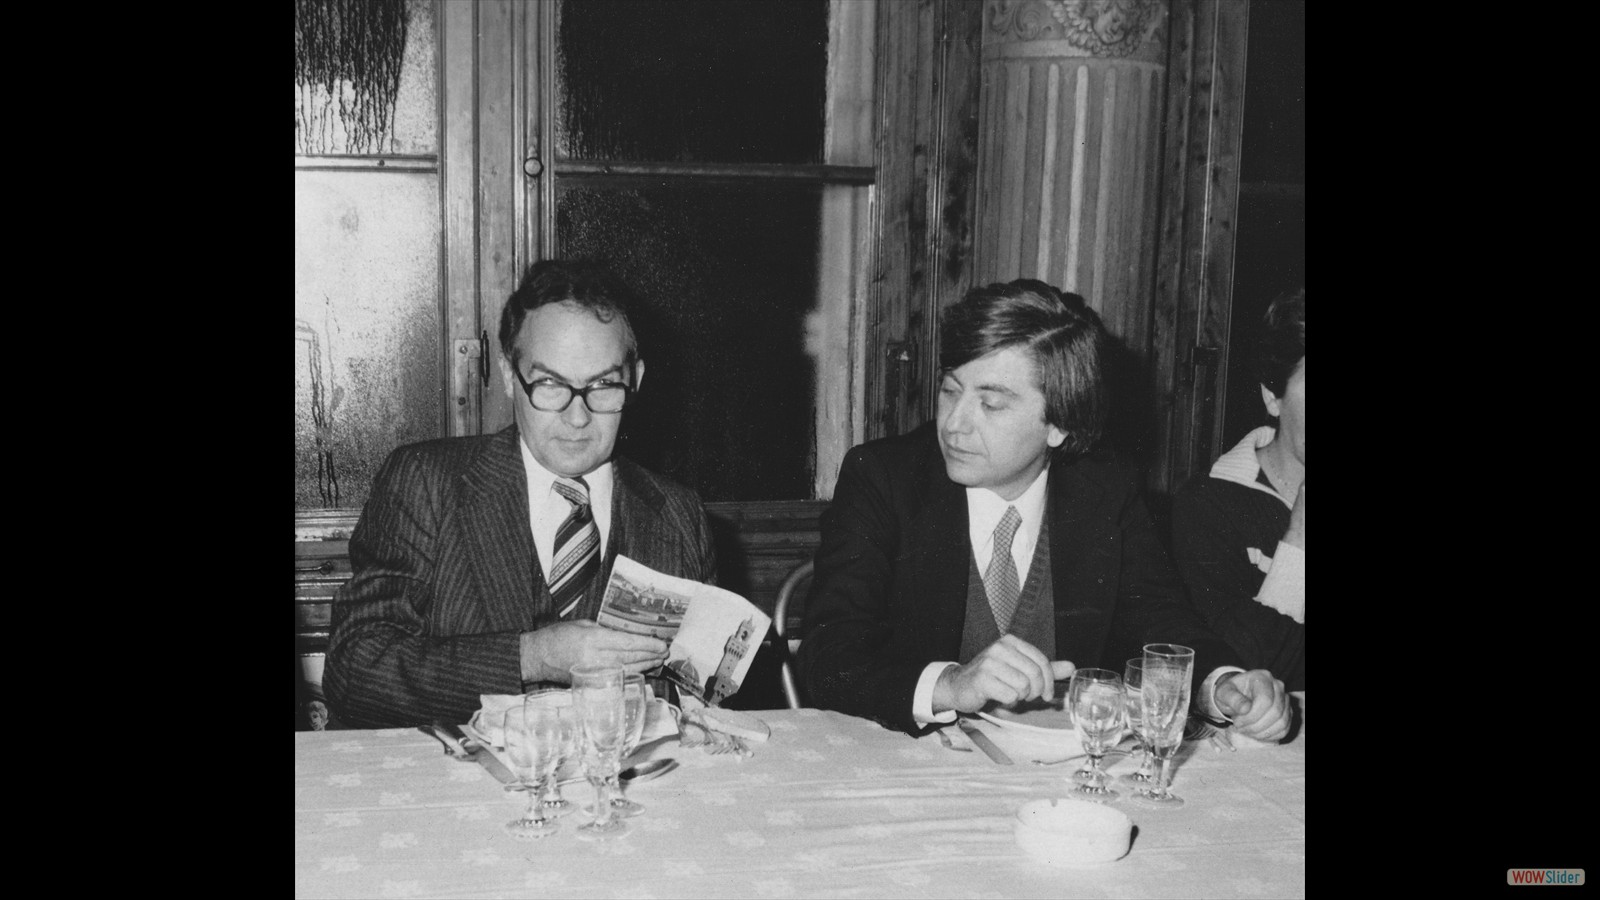 1st AICAT Conference - Firenze 17-19 December 1979 (Lafitte on the left, Della Gatta on the right during the social dinner)